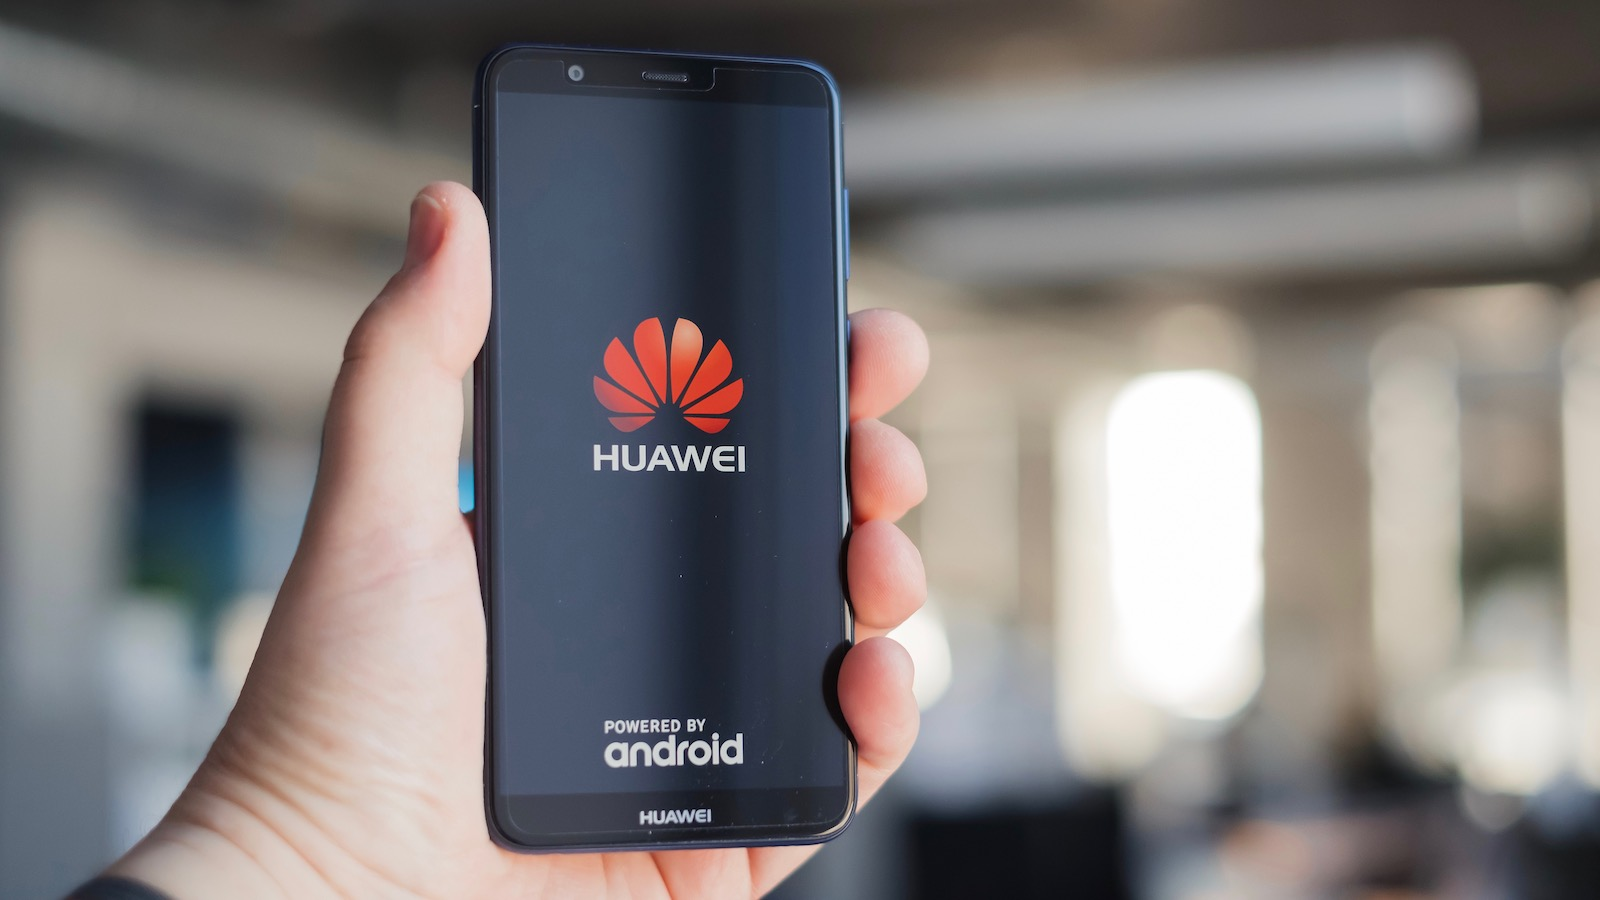 Huawei Android phones